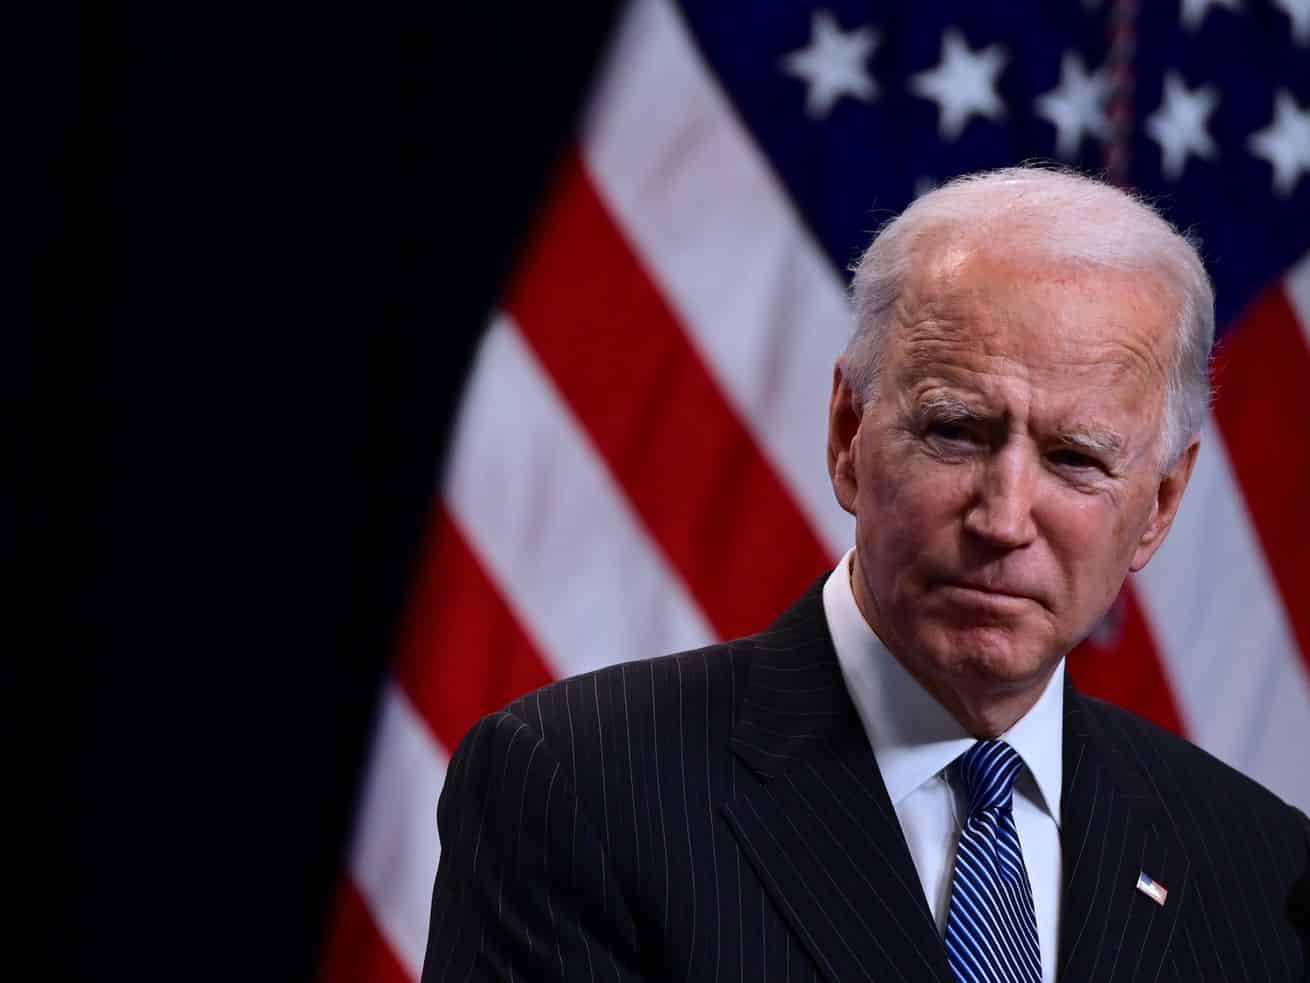 Biden’s Covid-19 relief plan has a Medicaid expansion problem